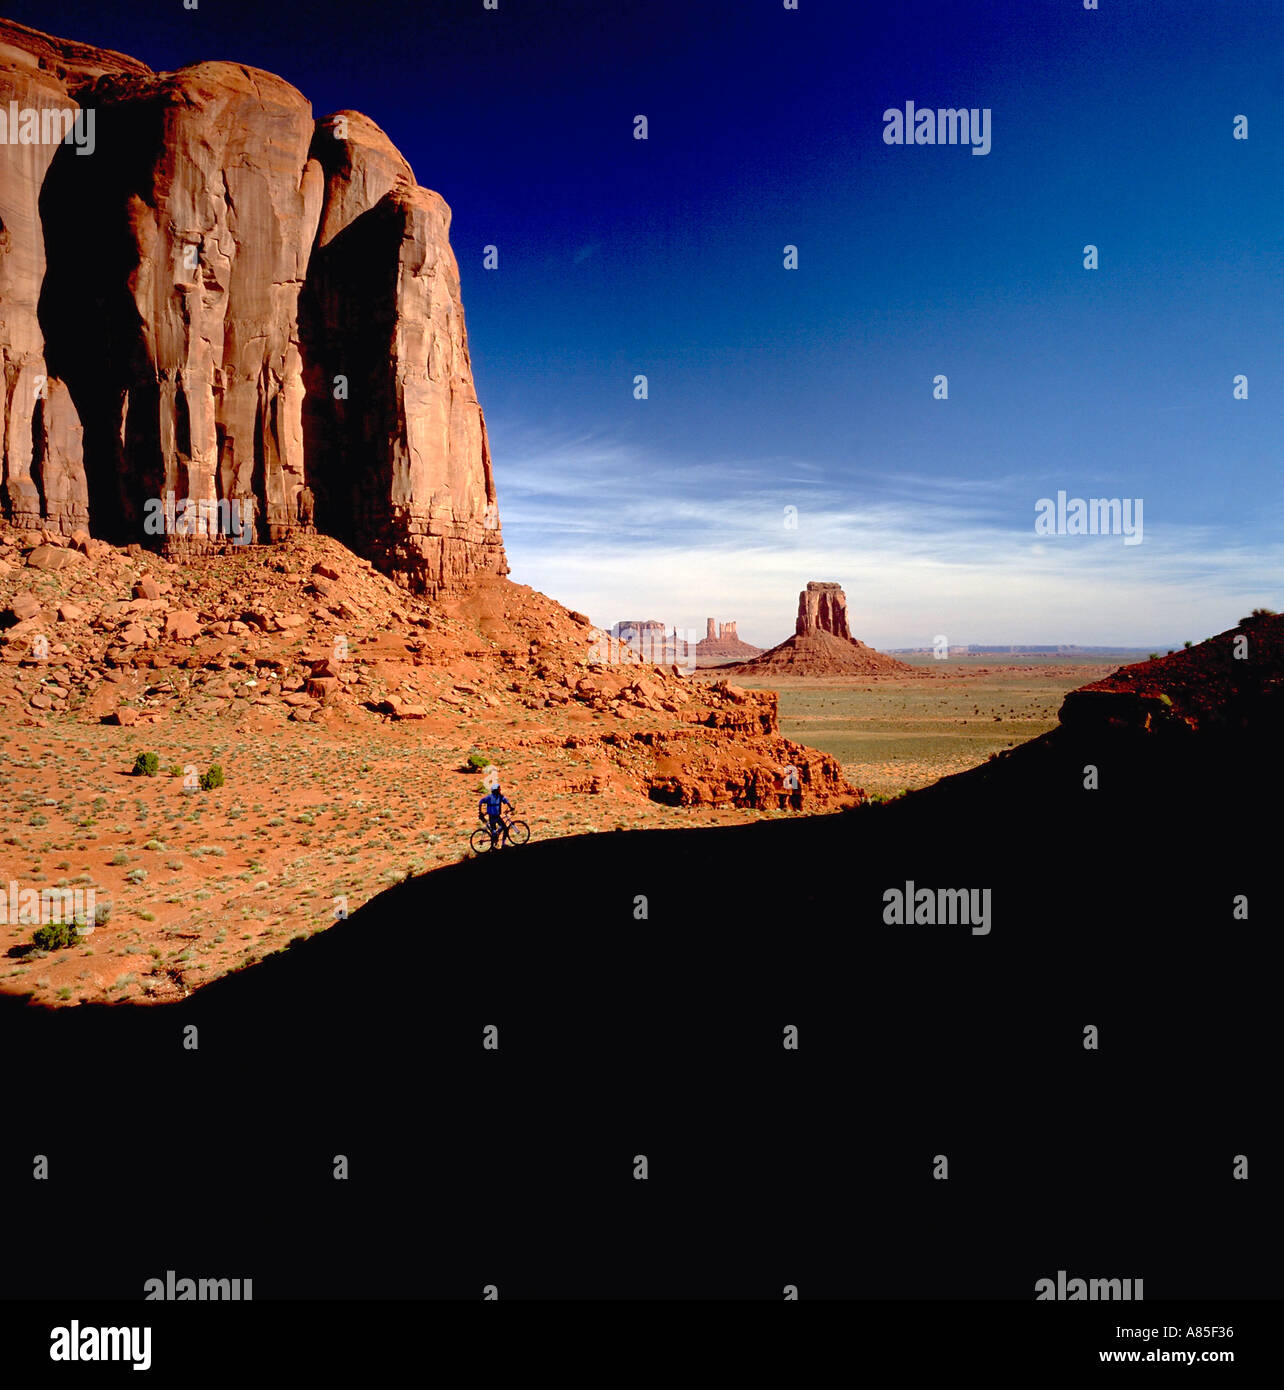 Bicyclist silhouetted in Monument Valley Arizona Stock Photo